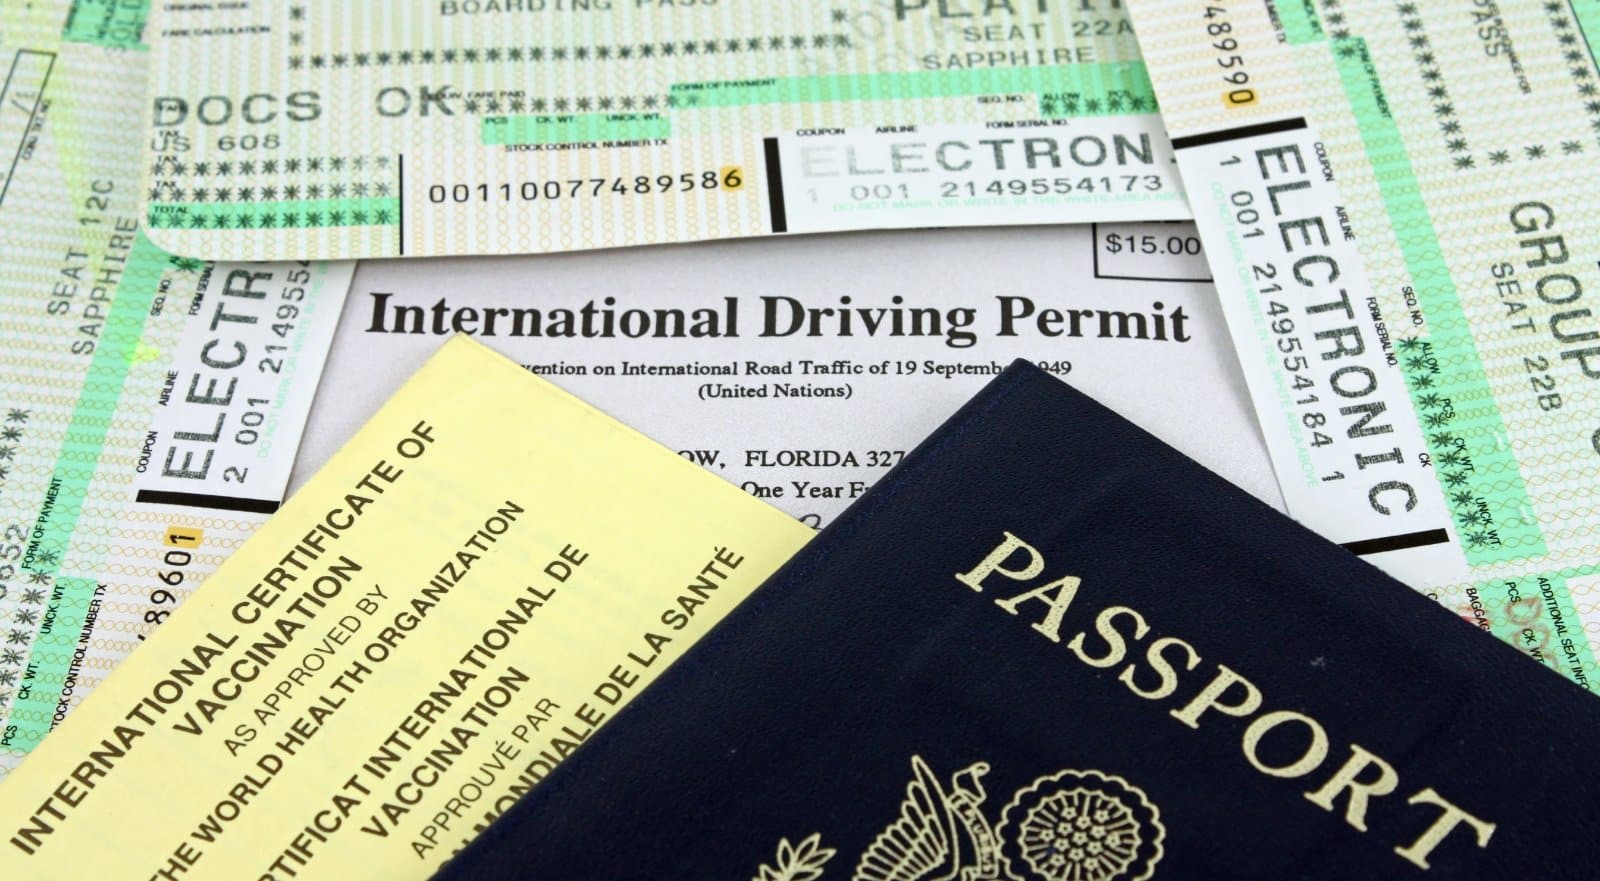 <p class="wp-caption-text">Image Credit: Shutterstock / Ken Durden</p>  <p><span>Familiarize yourself with the legal requirements and documentation for your road trip, especially when crossing international borders. Ensure your driver’s license is valid in the countries you’ll be visiting, and obtain an International Driving Permit (IDP) if necessary. Check visa requirements, vehicle insurance policies, and any documentation needed for border crossings to avoid legal complications during your trip.</span></p>